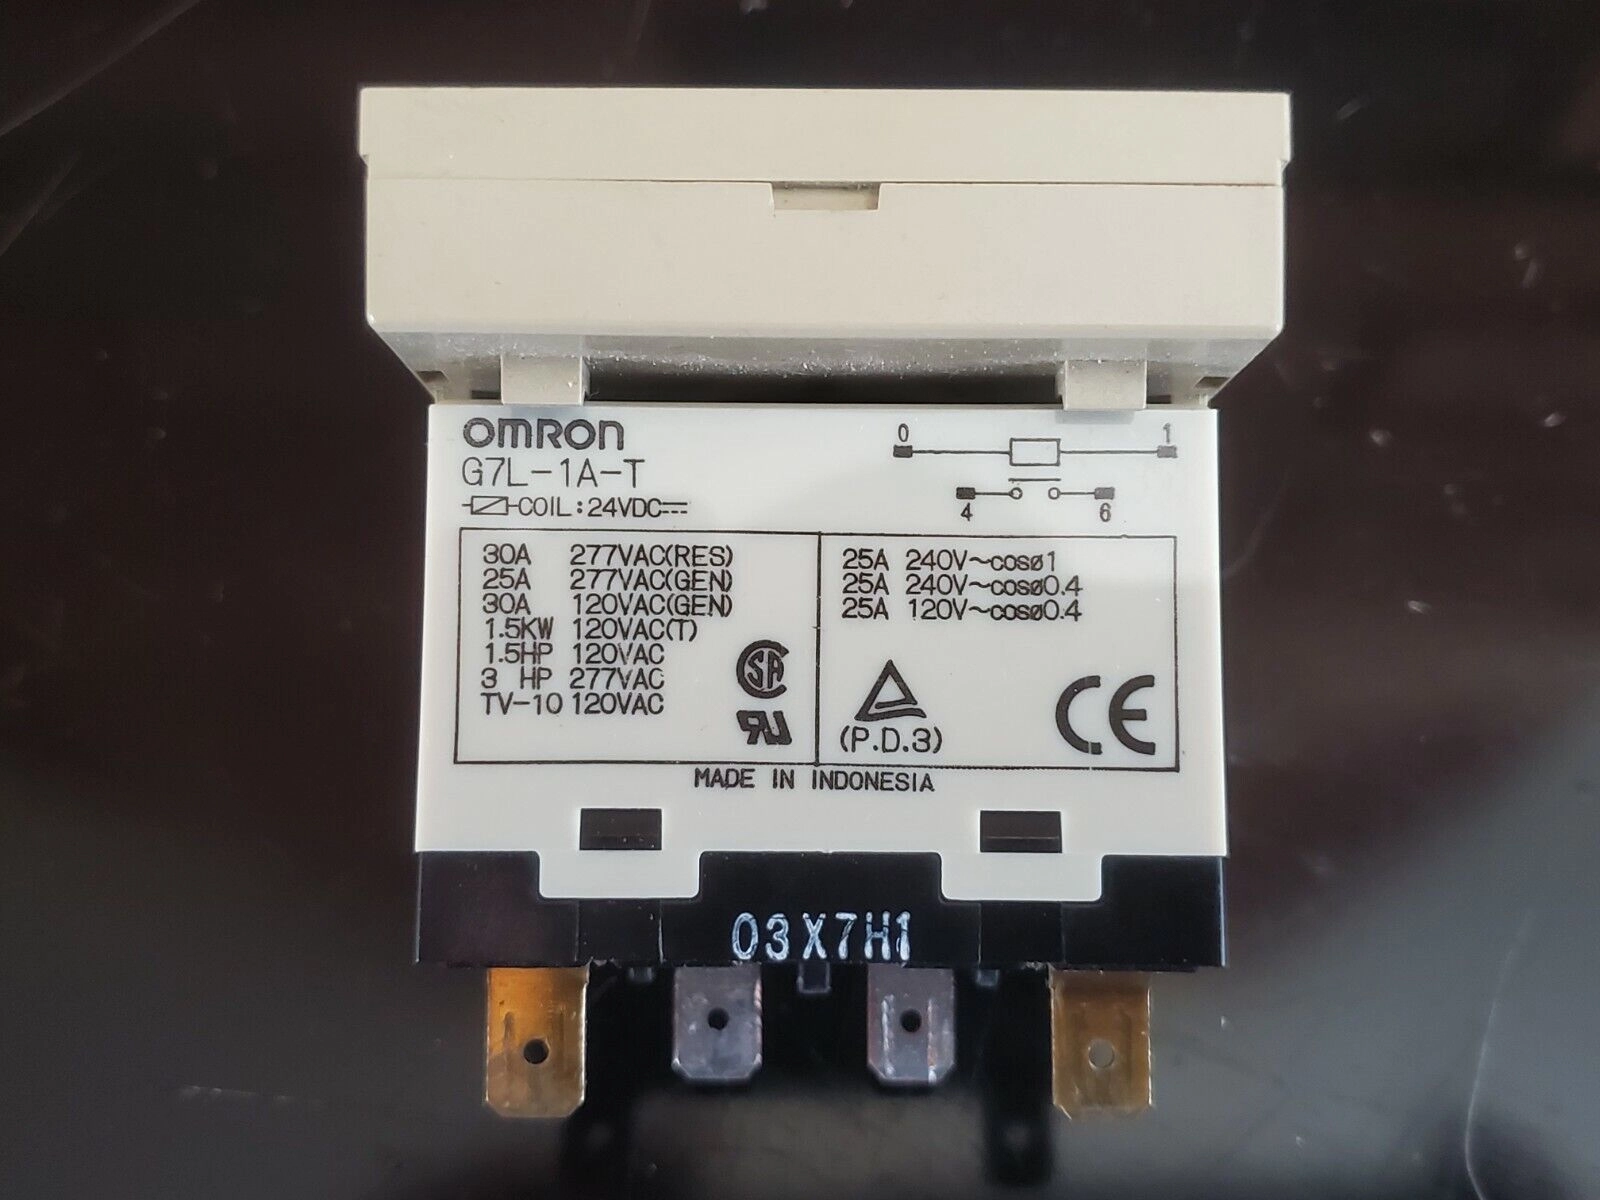 Omron G7L-1A-T All Purpose Relay 24VDC w/ Base